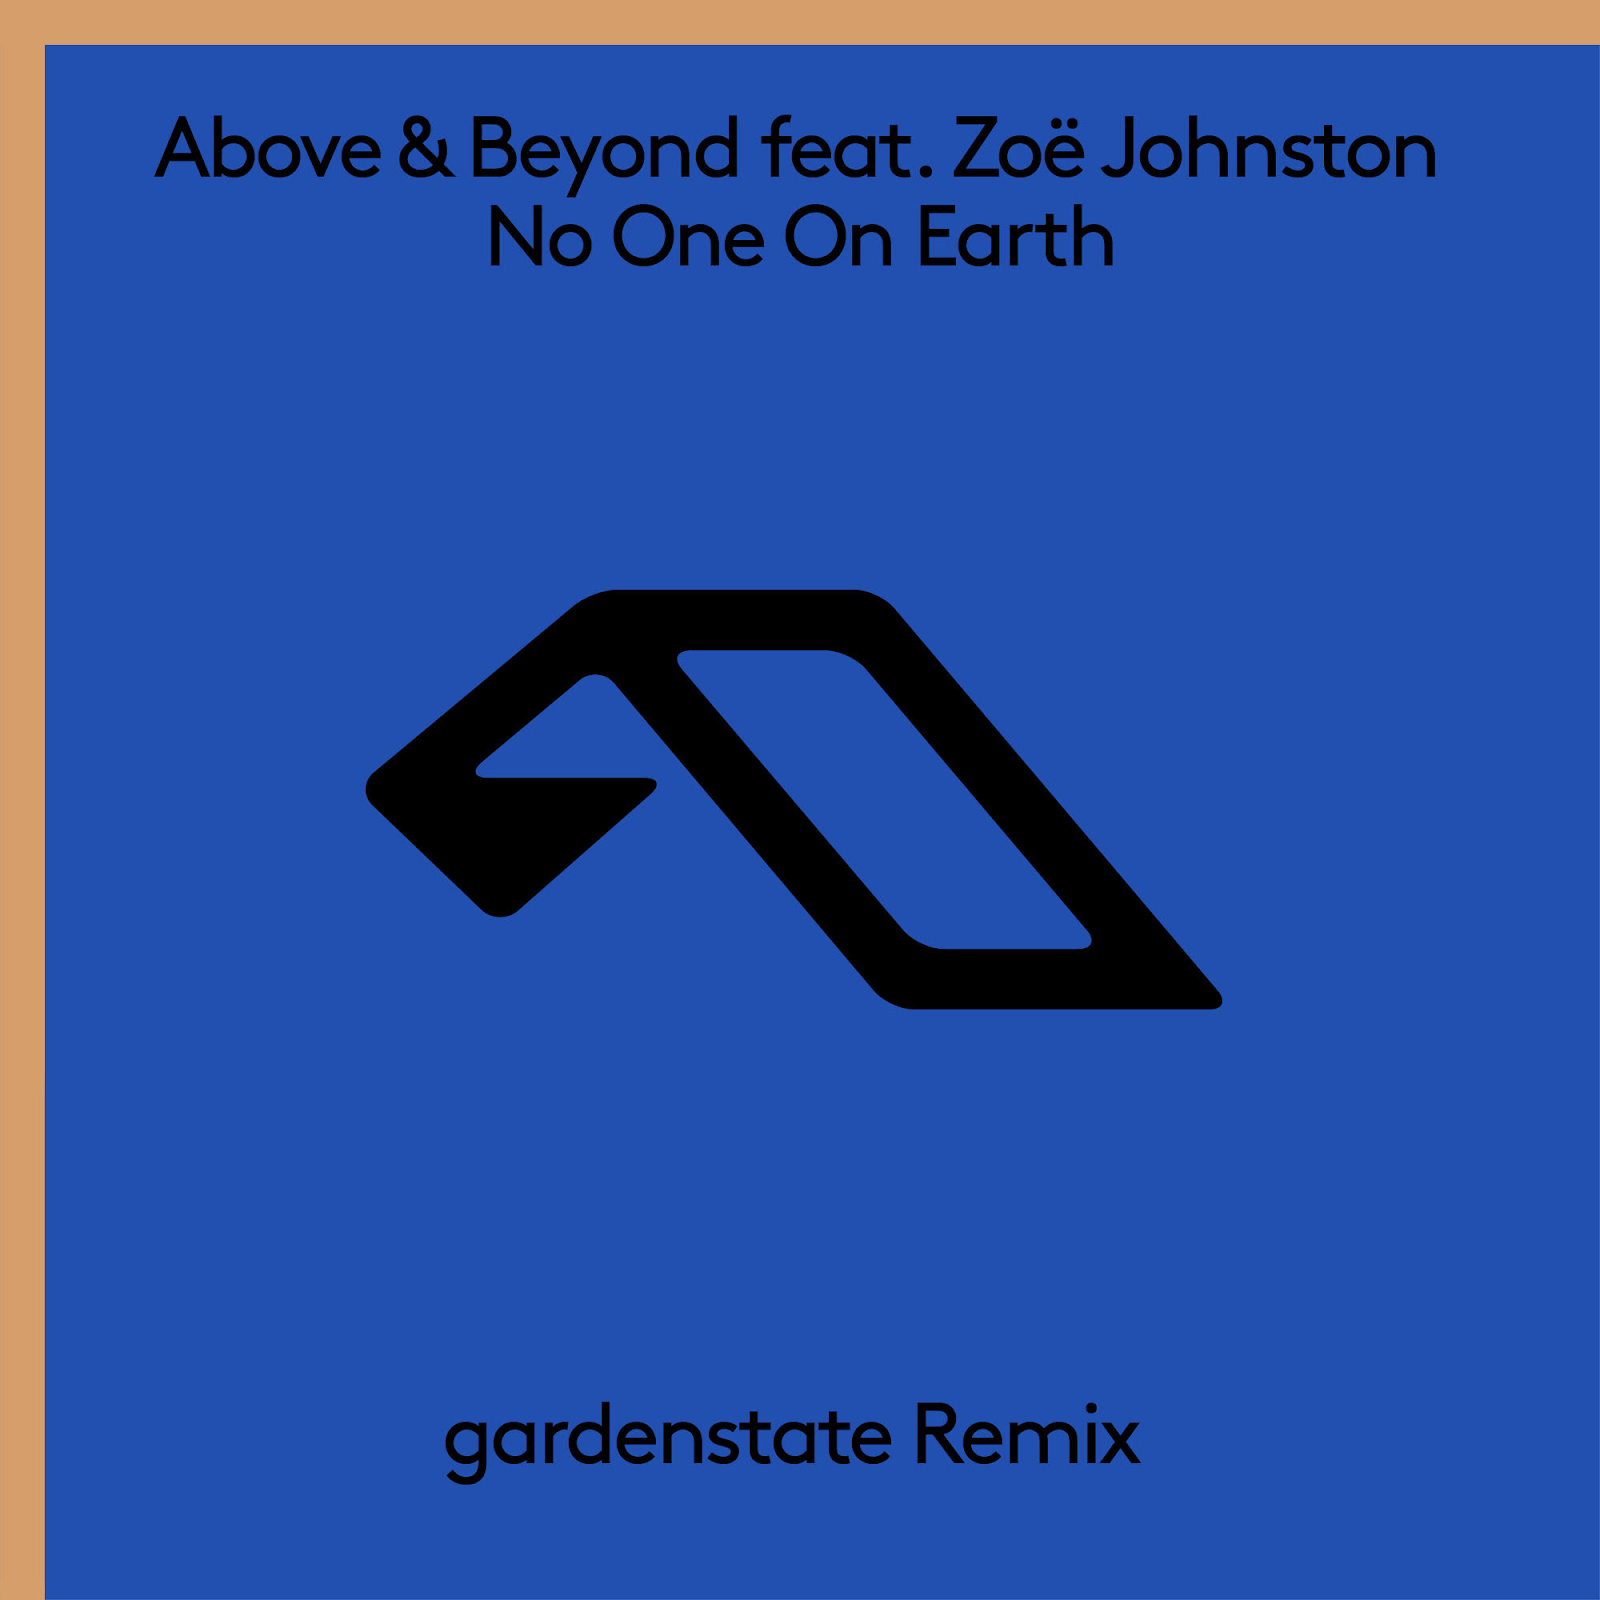 Above and Beyond feat. Zoë Johnston presents No One On Earth (gardenstate Remix) on Anjunabeats